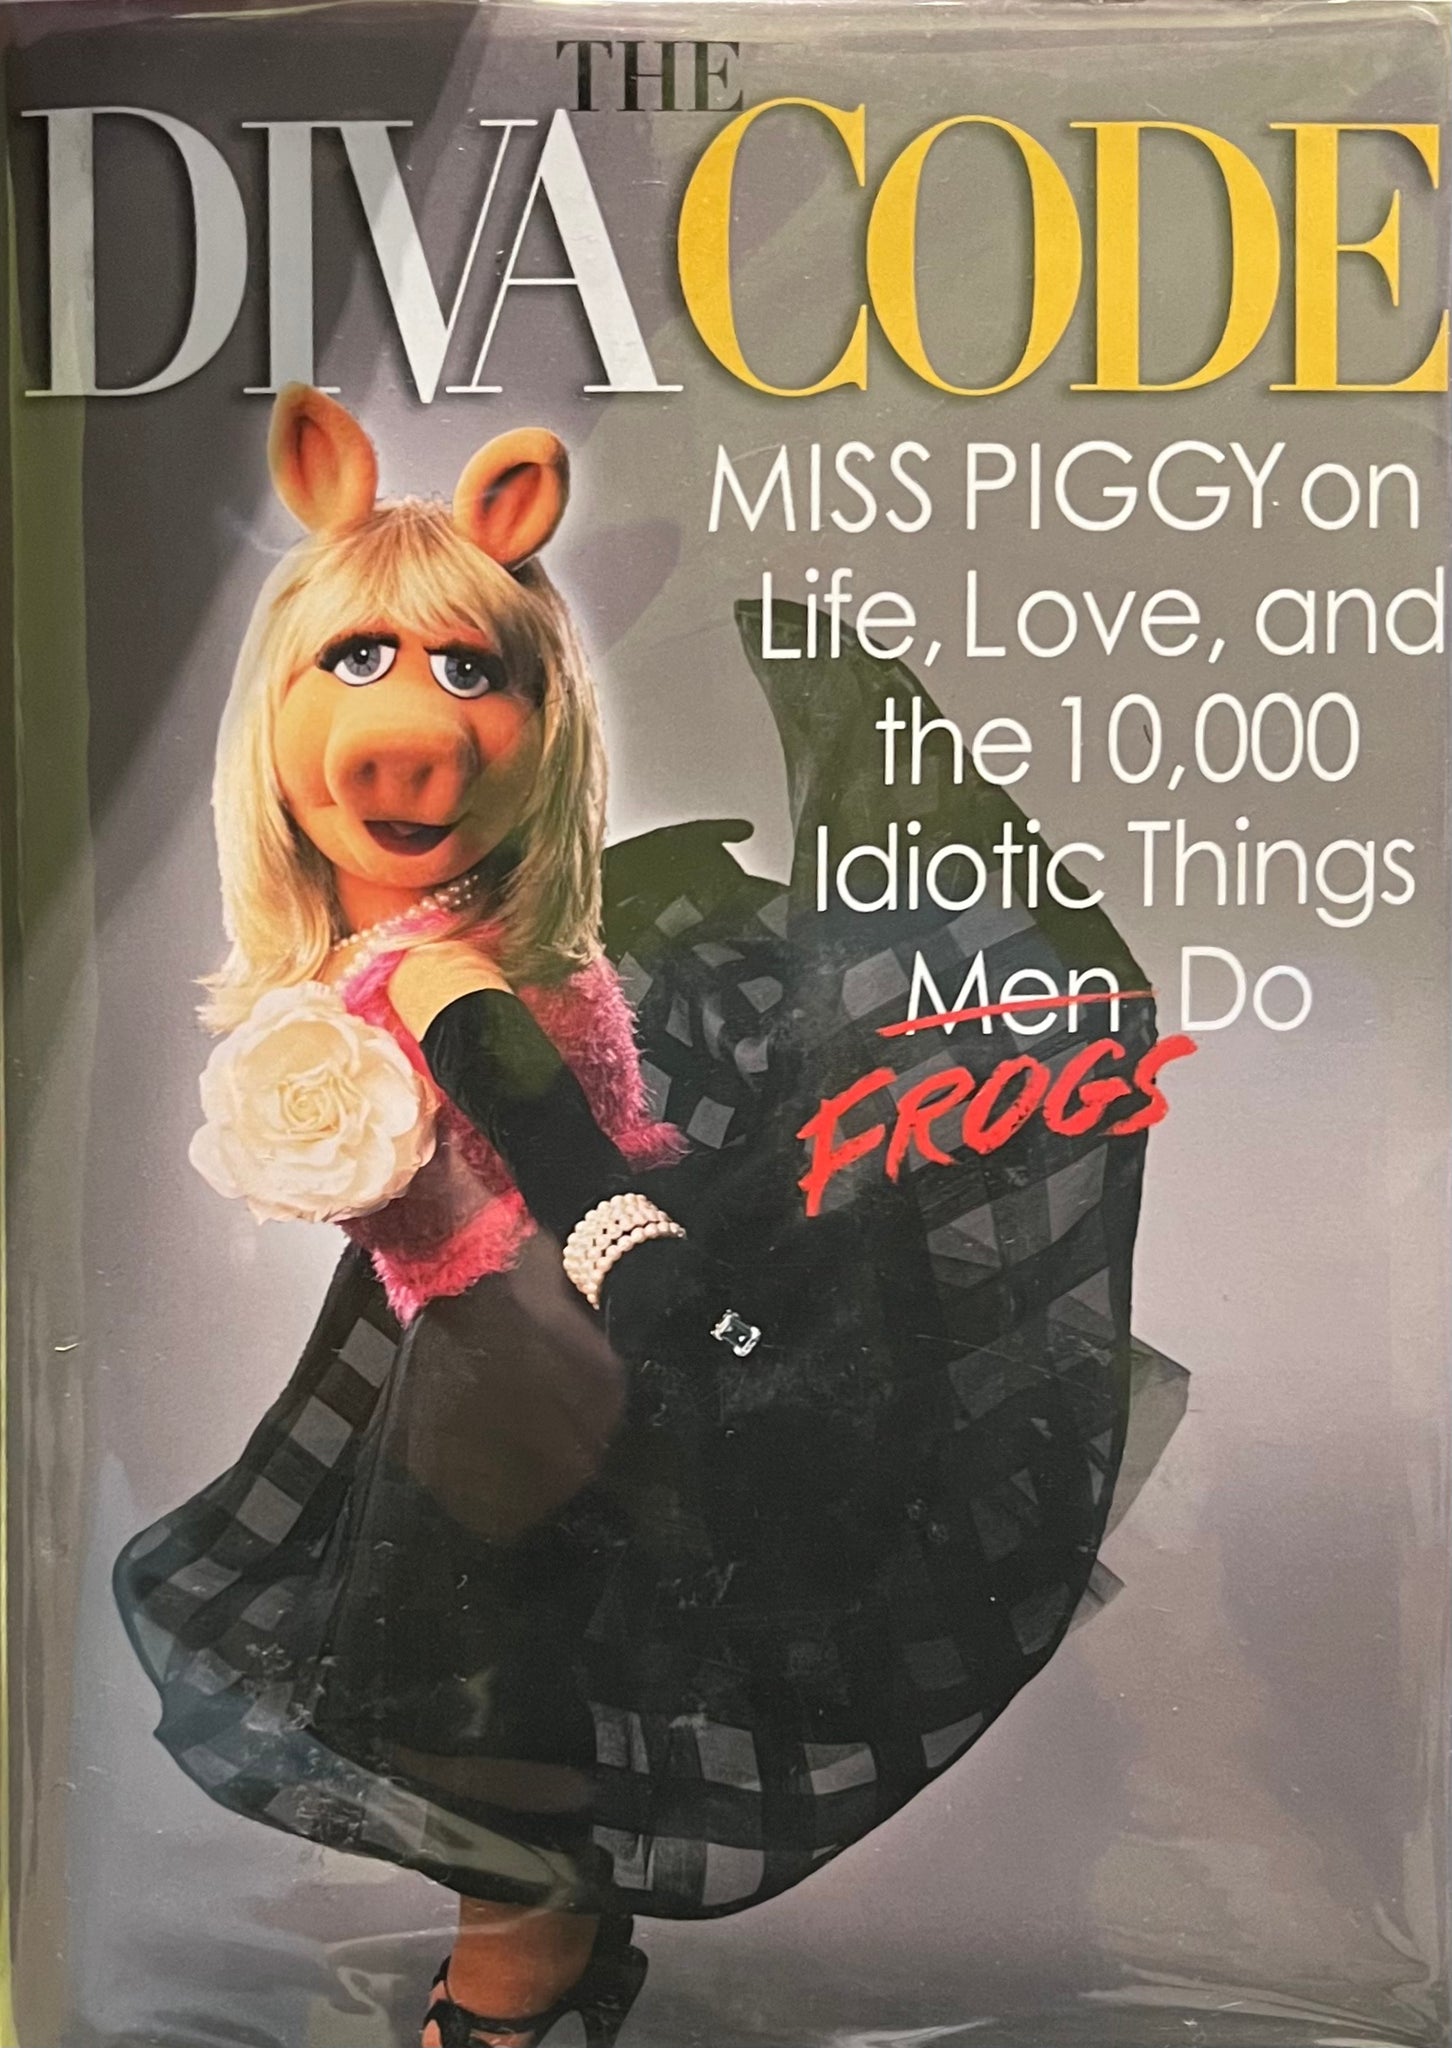 The Diva Code: Miss Piggy on Life, Love and the 10,000 Idiotic Things Frogs Do, Jim Lewis